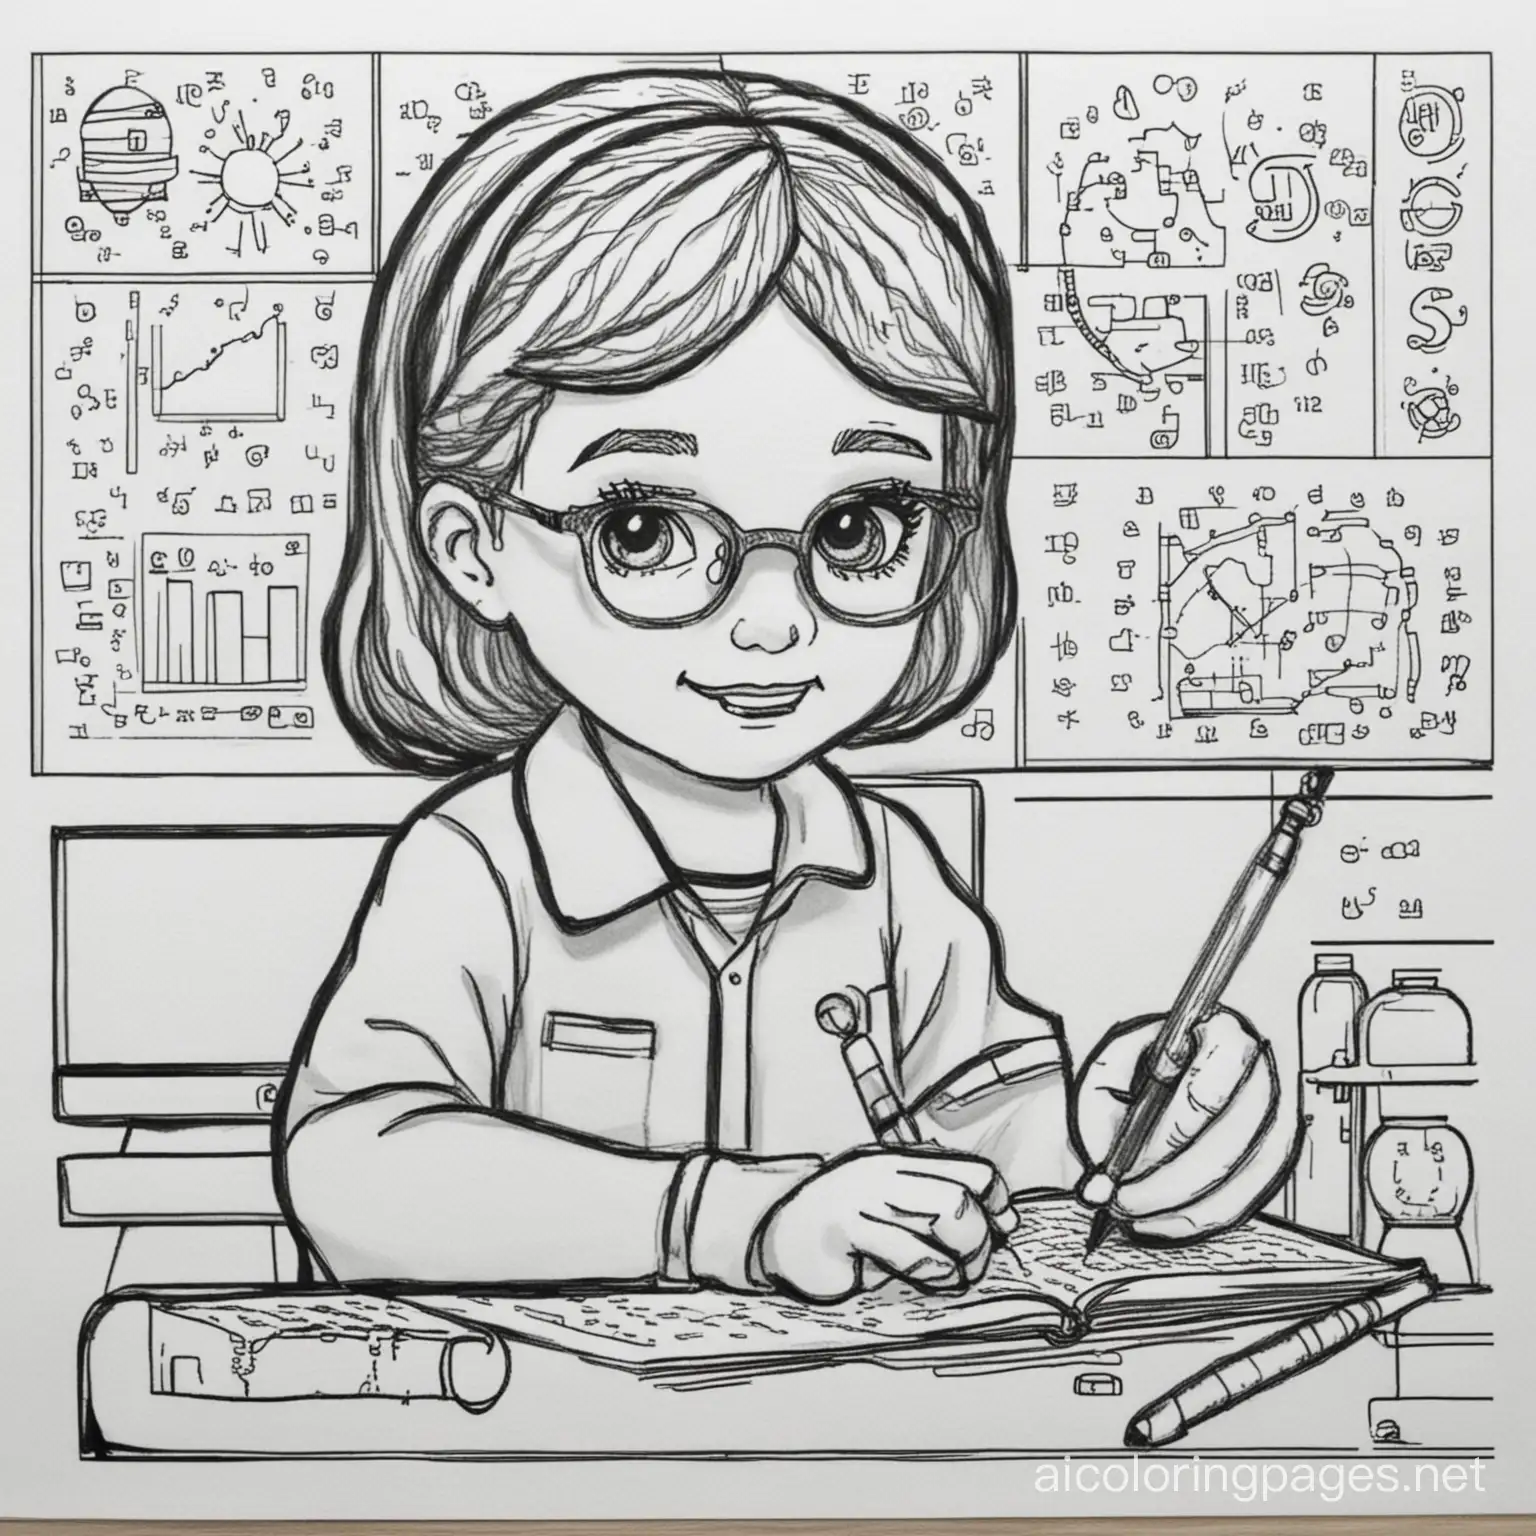 Teach me to be a data scientist , Coloring Page, black and white, line art, white background, Simplicity, Ample White Space. The background of the coloring page is plain white to make it easy for young children to color within the lines. The outlines of all the subjects are easy to distinguish, making it simple for kids to color without too much difficulty